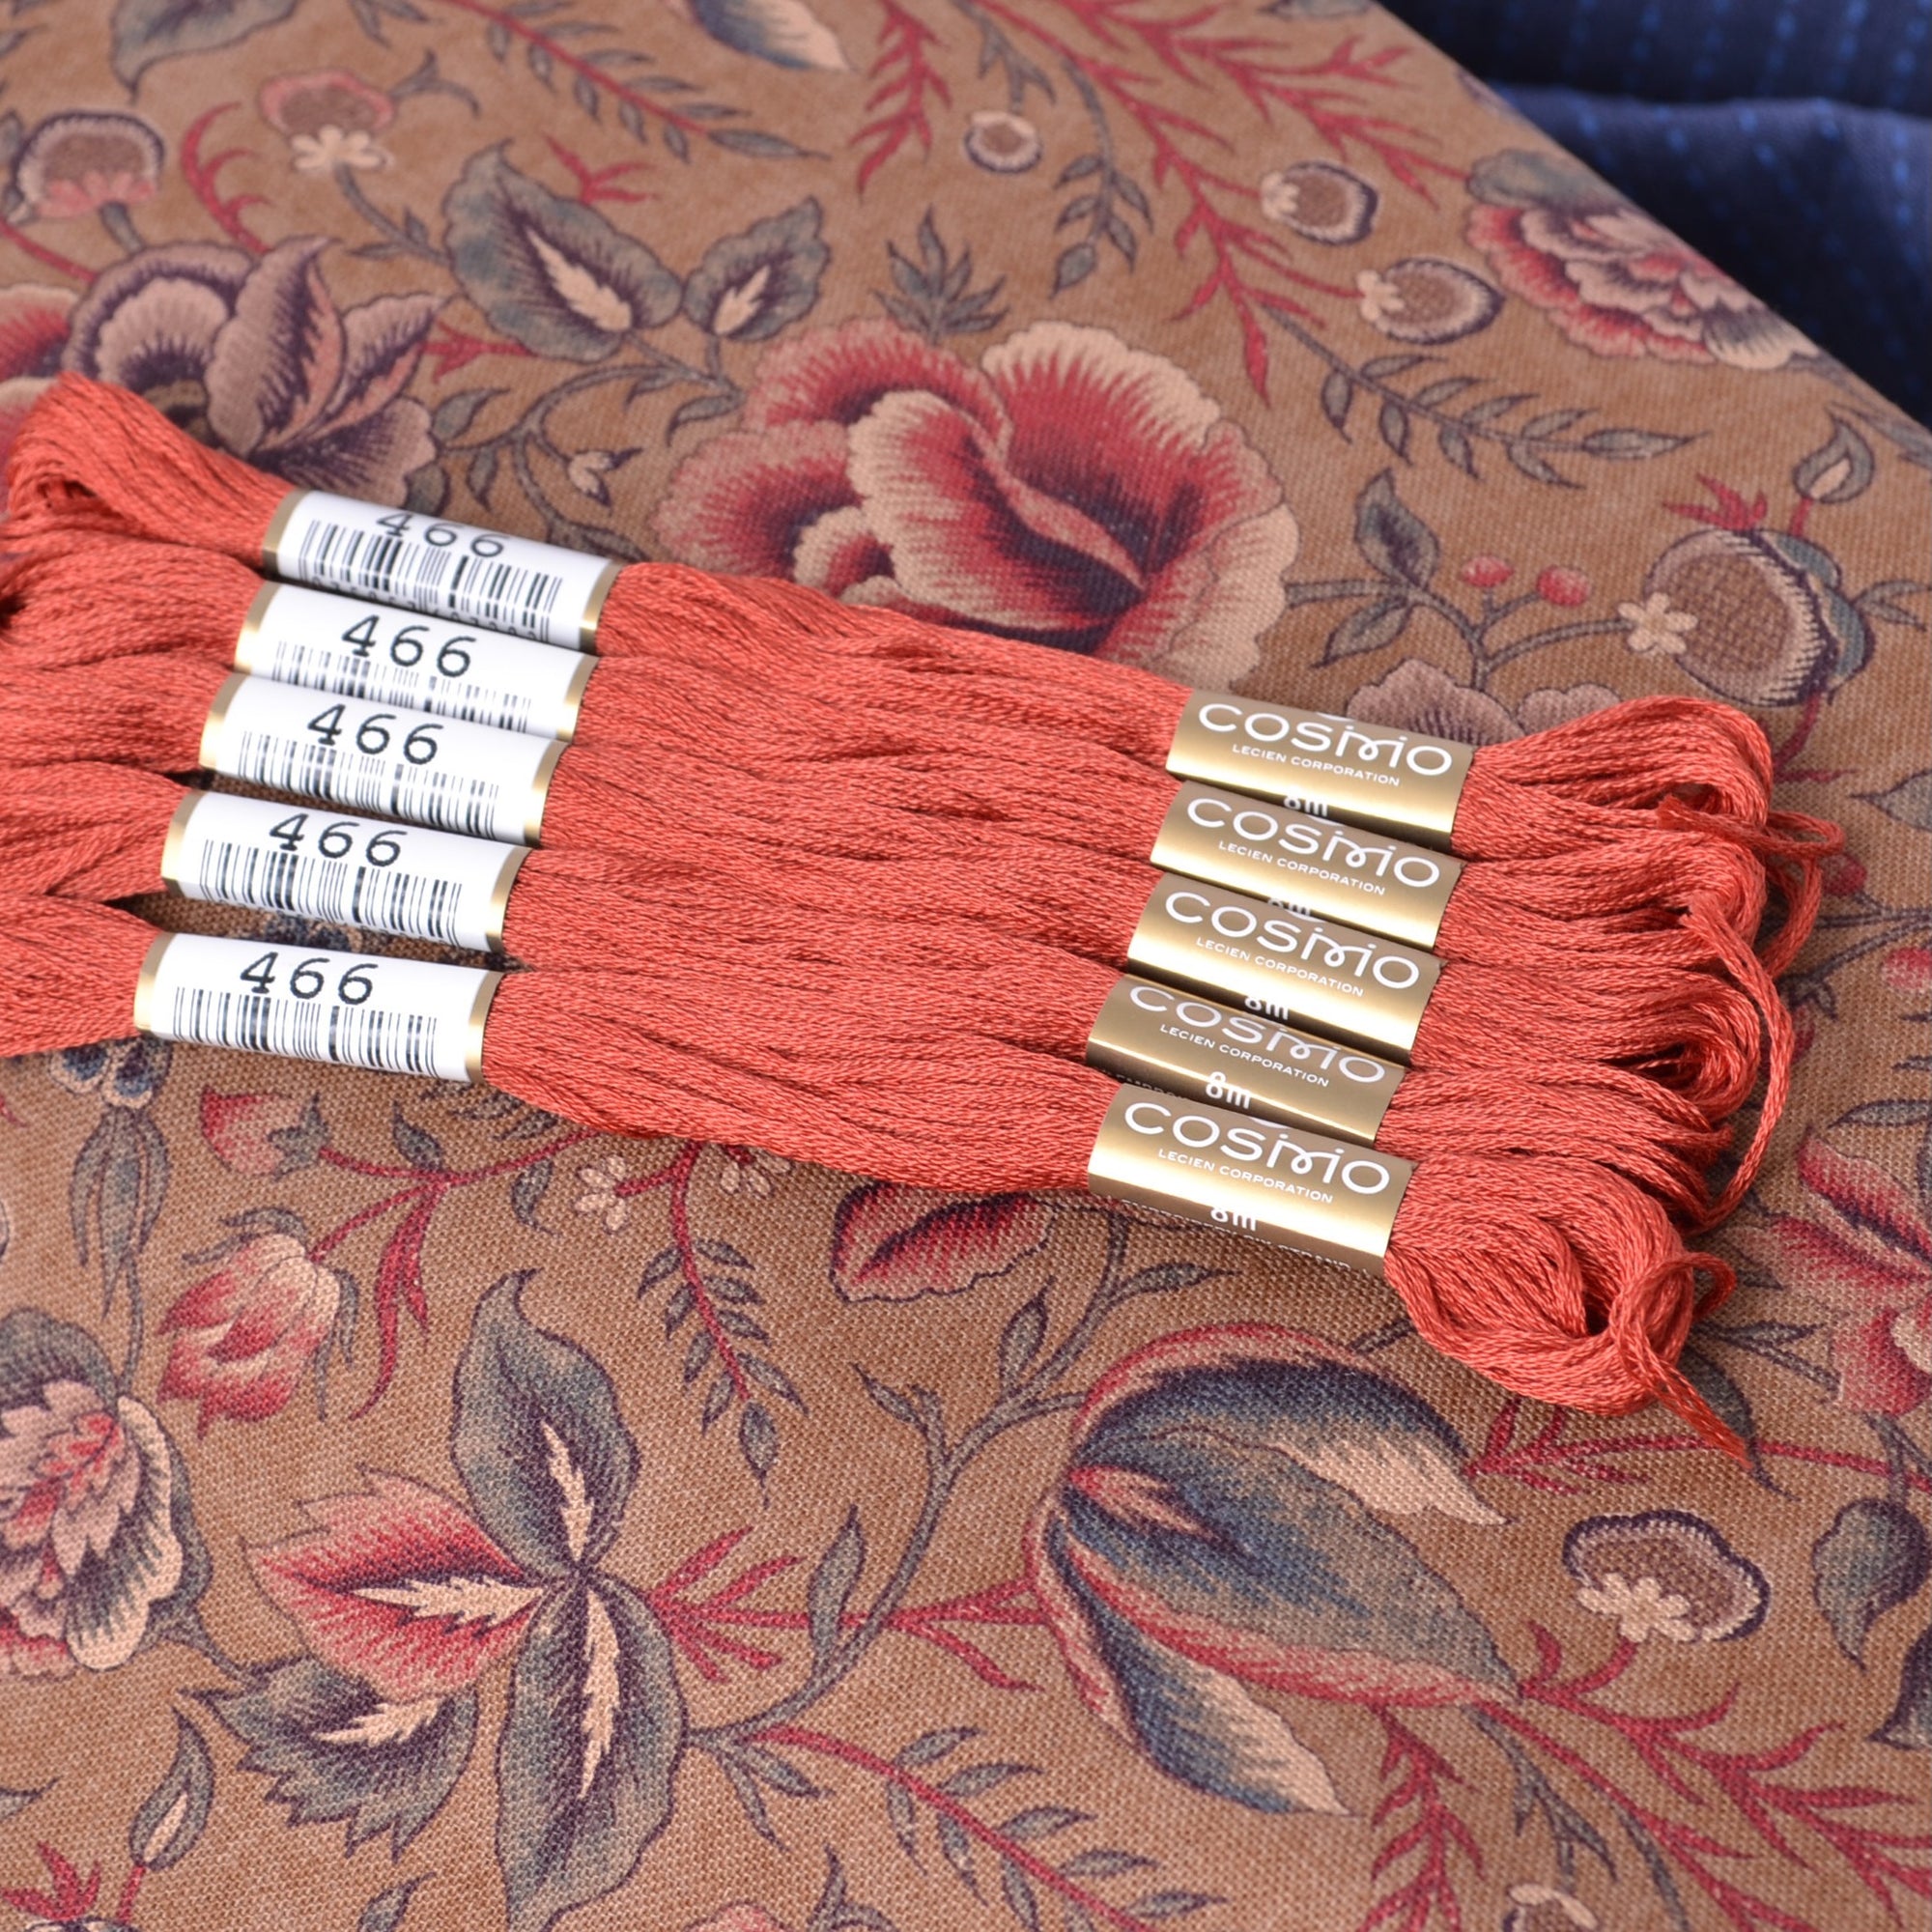 Cosmo Embroidery Thread #464, Amber Brown - A Threaded Needle